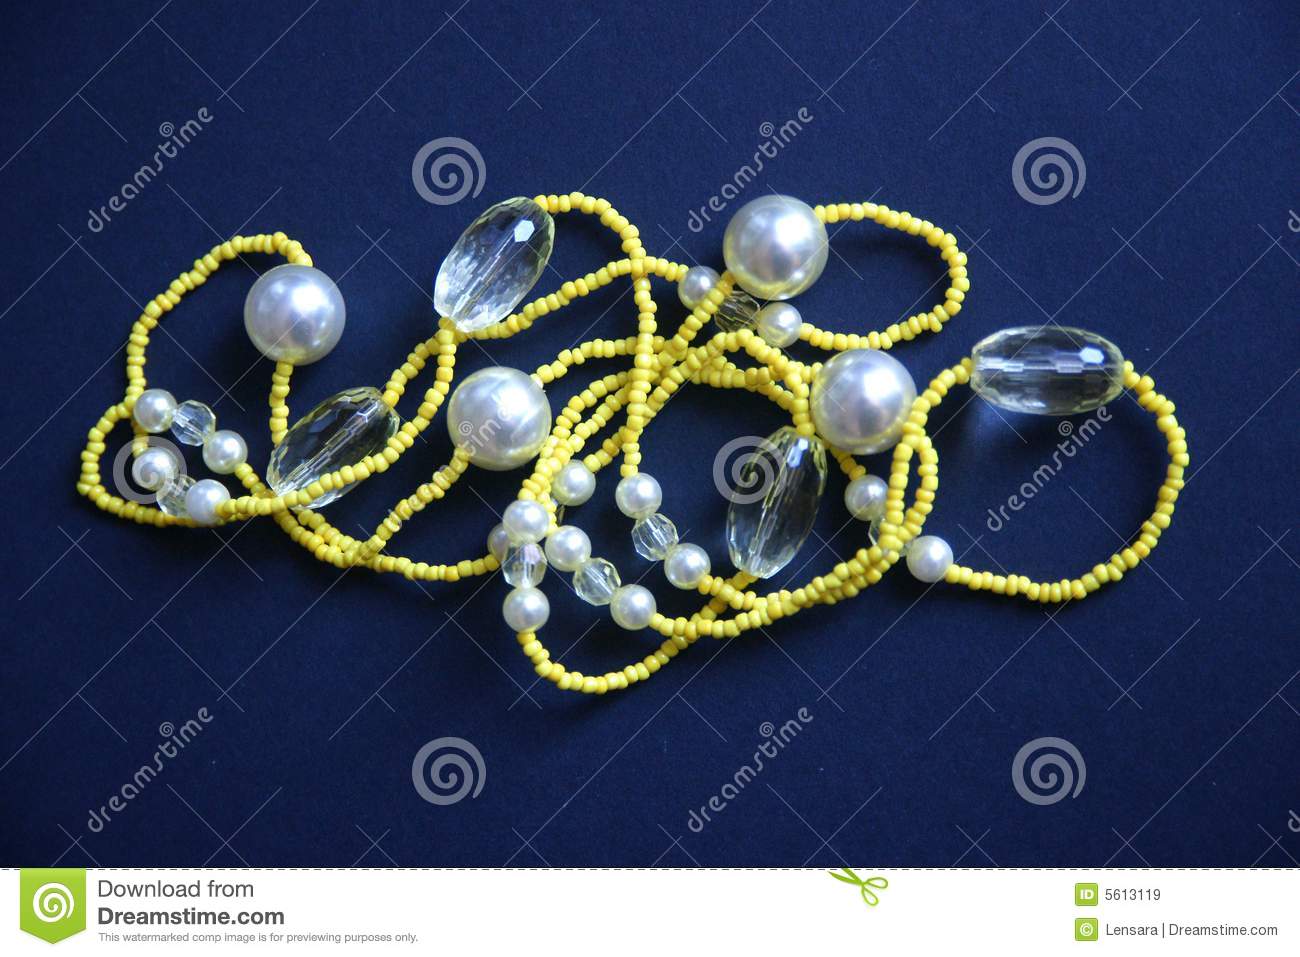 Plastic Costume Jewelry Necklace Royalty Free Stock Images   Image    